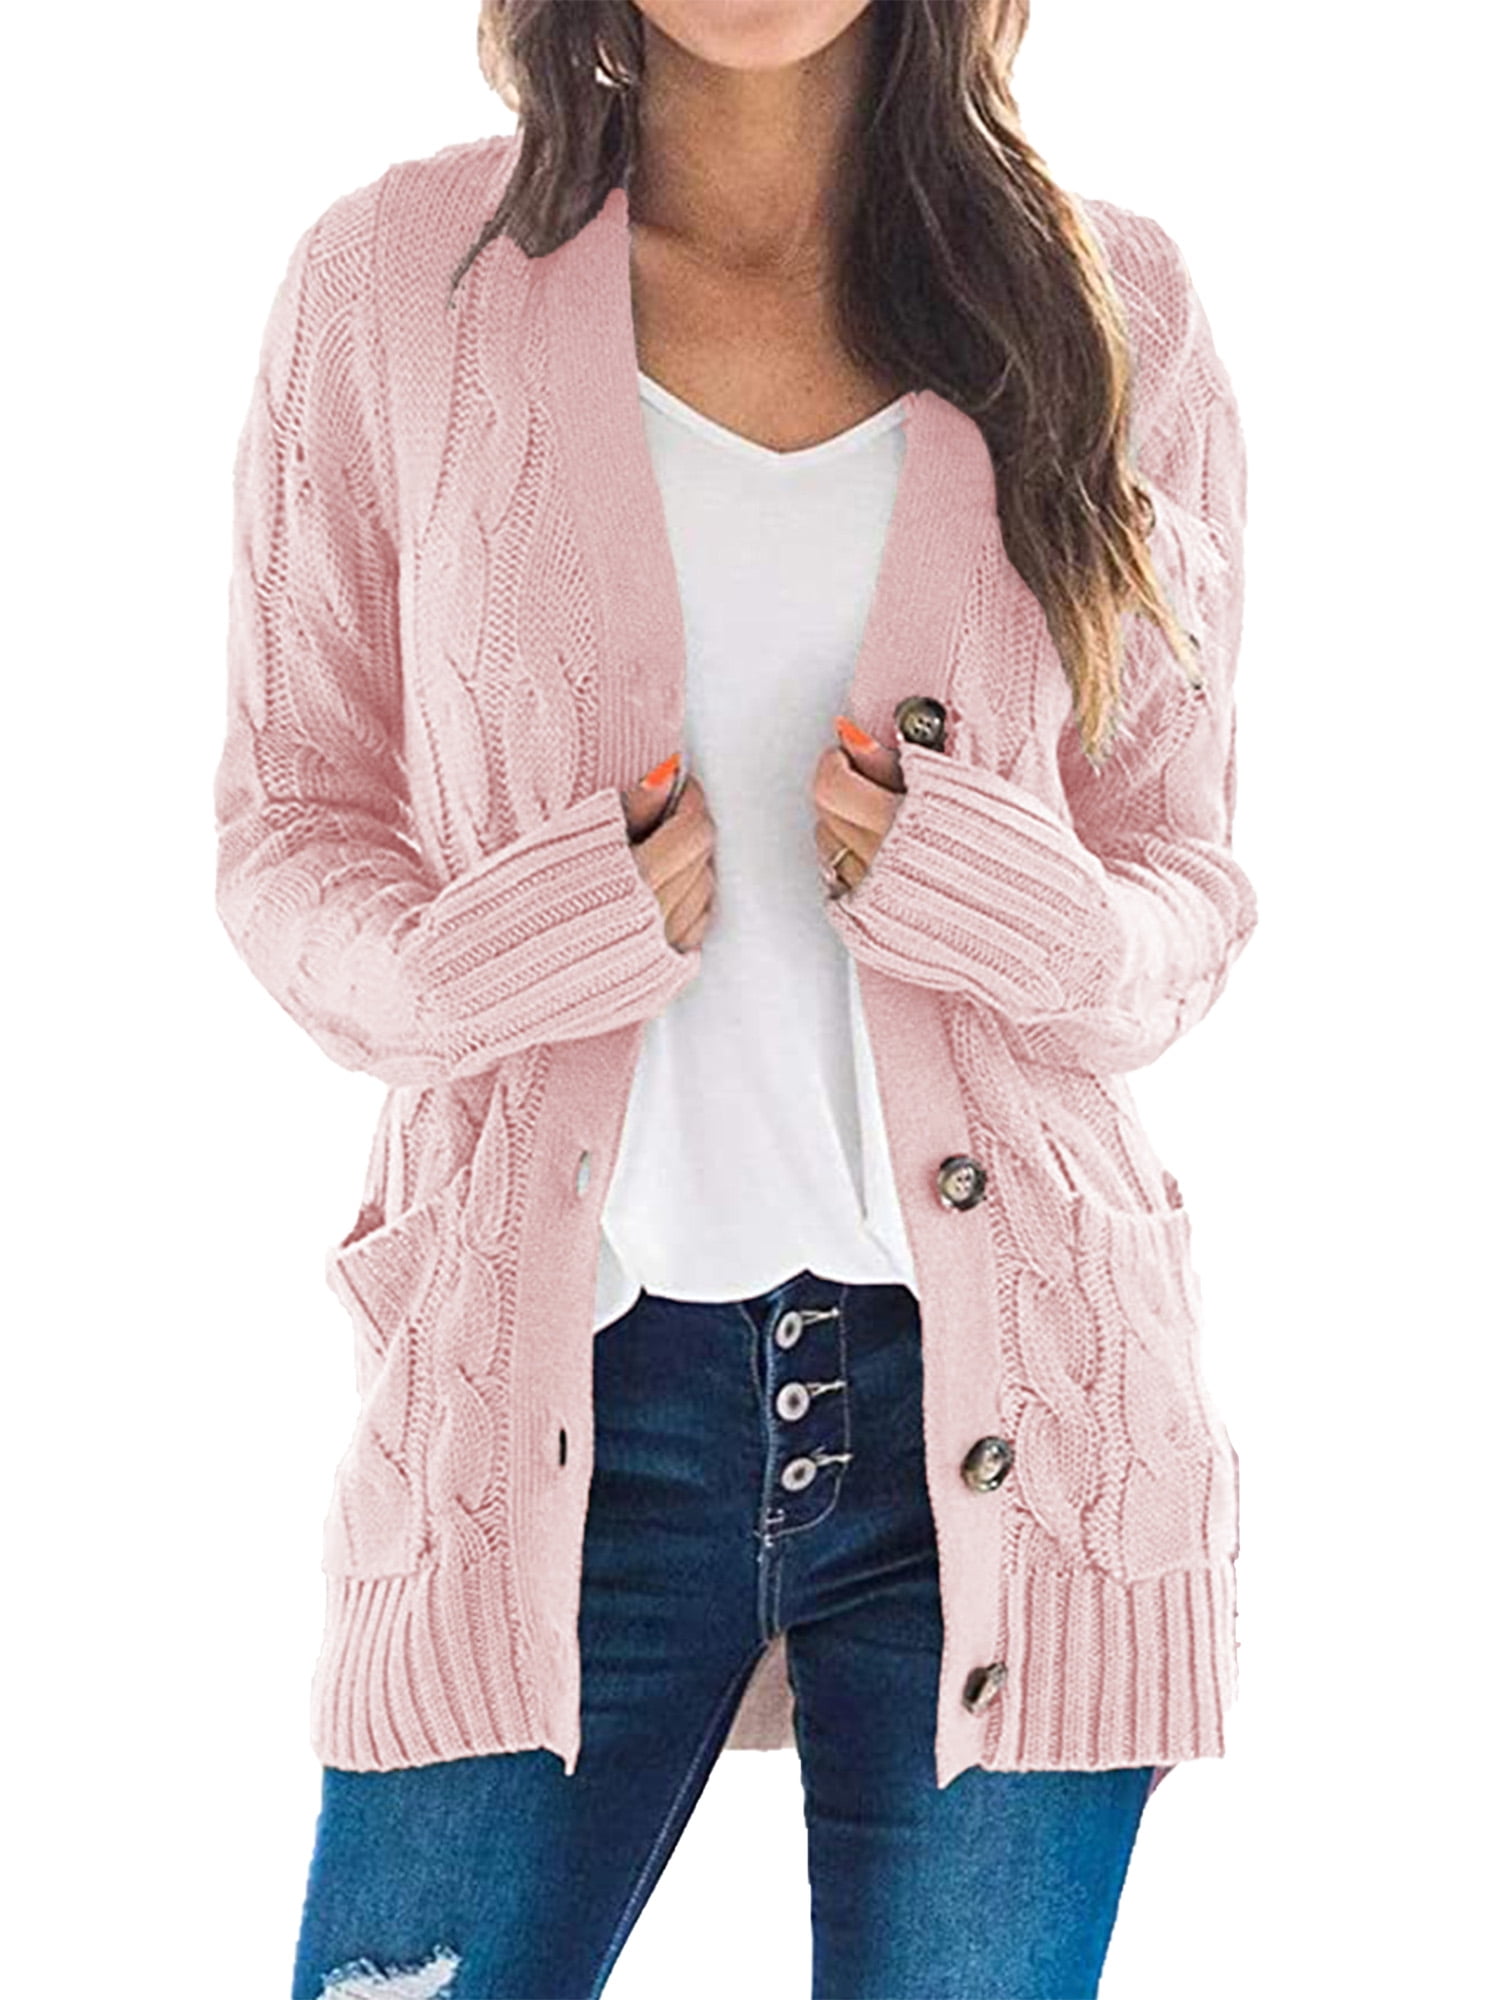 Womens Long Sleeves Chunky Cable Knit Cardigan Coat Button Casual Outwear Jacket